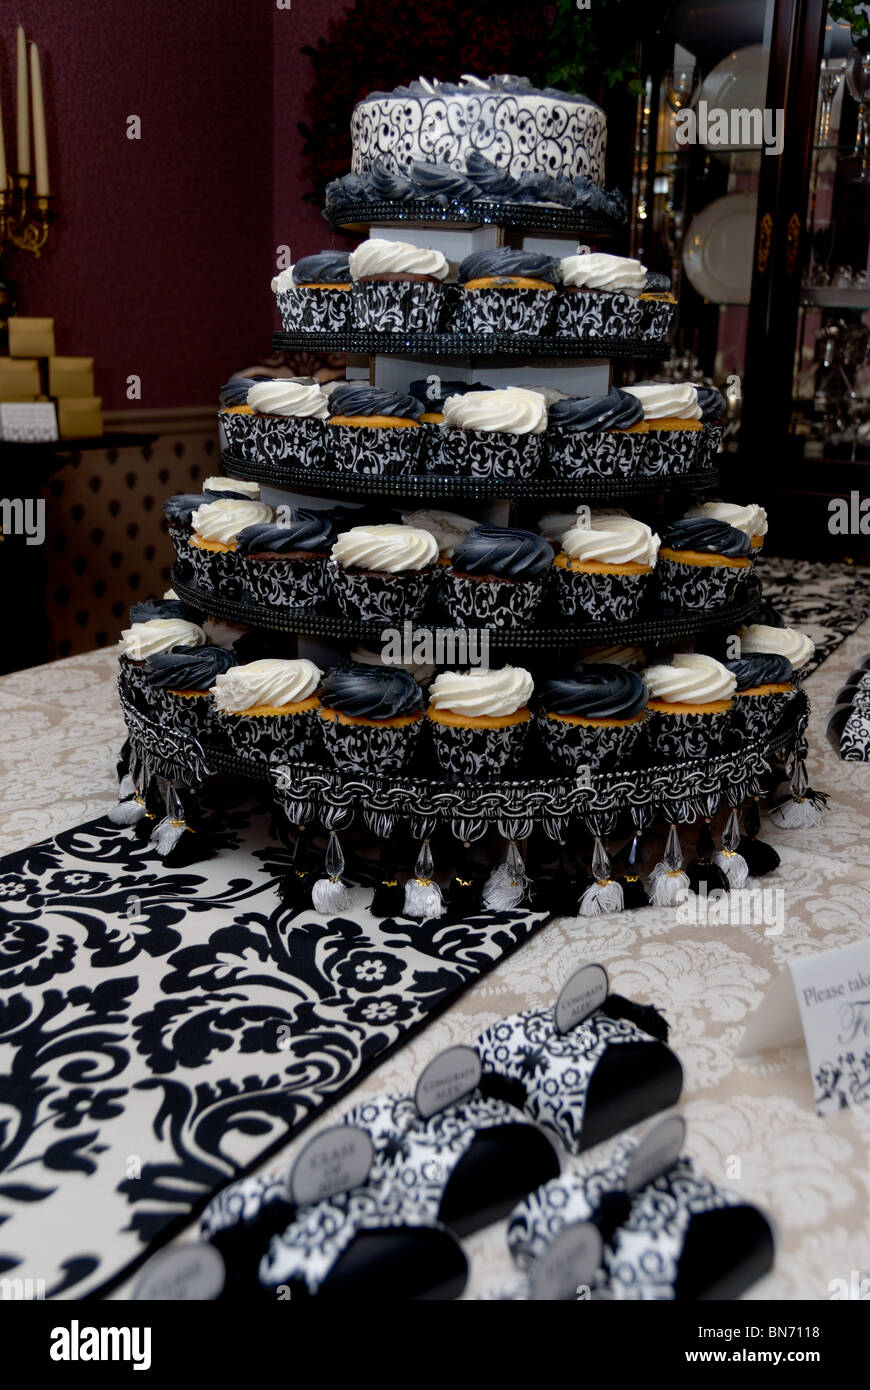 An elegant cupcake tree of black and white cupcakes on a table with a black damask runner, and matching party favors. Stock Photo